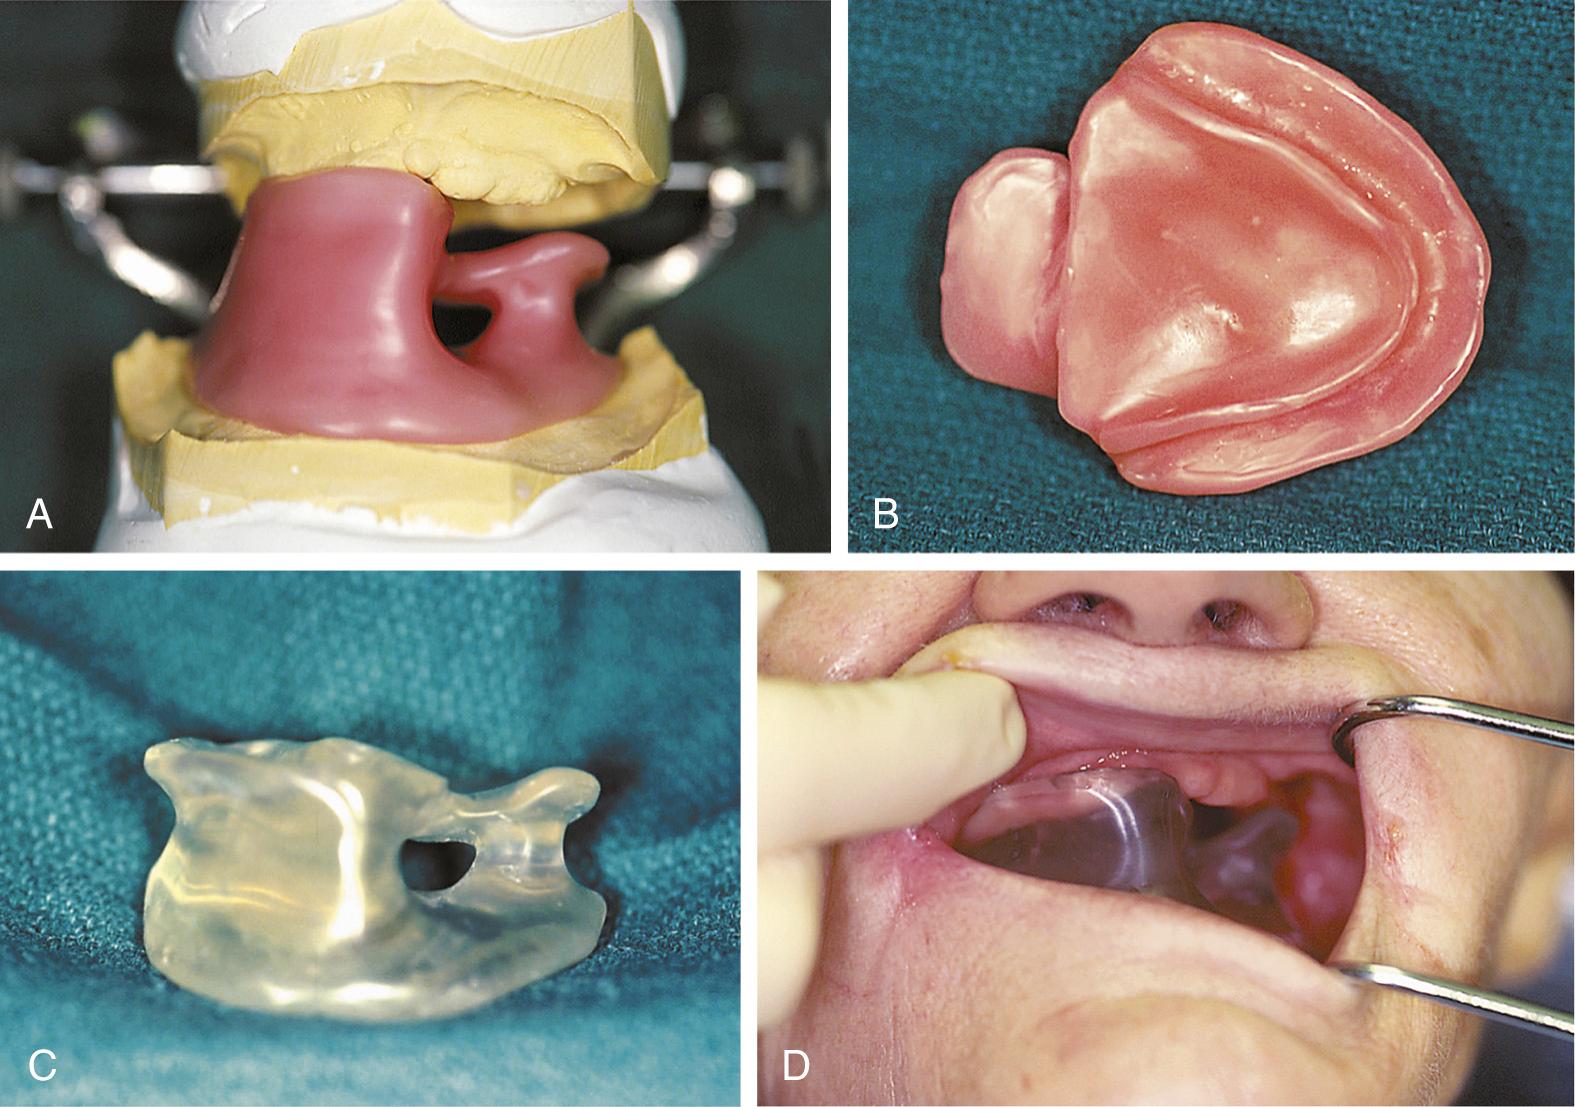 Fig. 93.6, (A) Anterior view of articulated maxillary and mandibular models and the wax pattern used to generate an intraoral device that serves to repetitively position the mandible and oral tongue; it also supports a water-filled diaphragm for use during radiation fractionation, and the diaphragm thus occludes maxillectomy defects and serves as a tissue-equivalent material. (B) Inferior view of the wax pattern demonstrates an axial shelf to inferiorly confine and exclude the oral tongue from the radiation fields. (C) Anterior view of the finished intraoral device. (D) Anterior view of the positioned intraoral device demonstrates the diaphragm-supporting shelf situated immediately inferior to the maxillectomy defect.